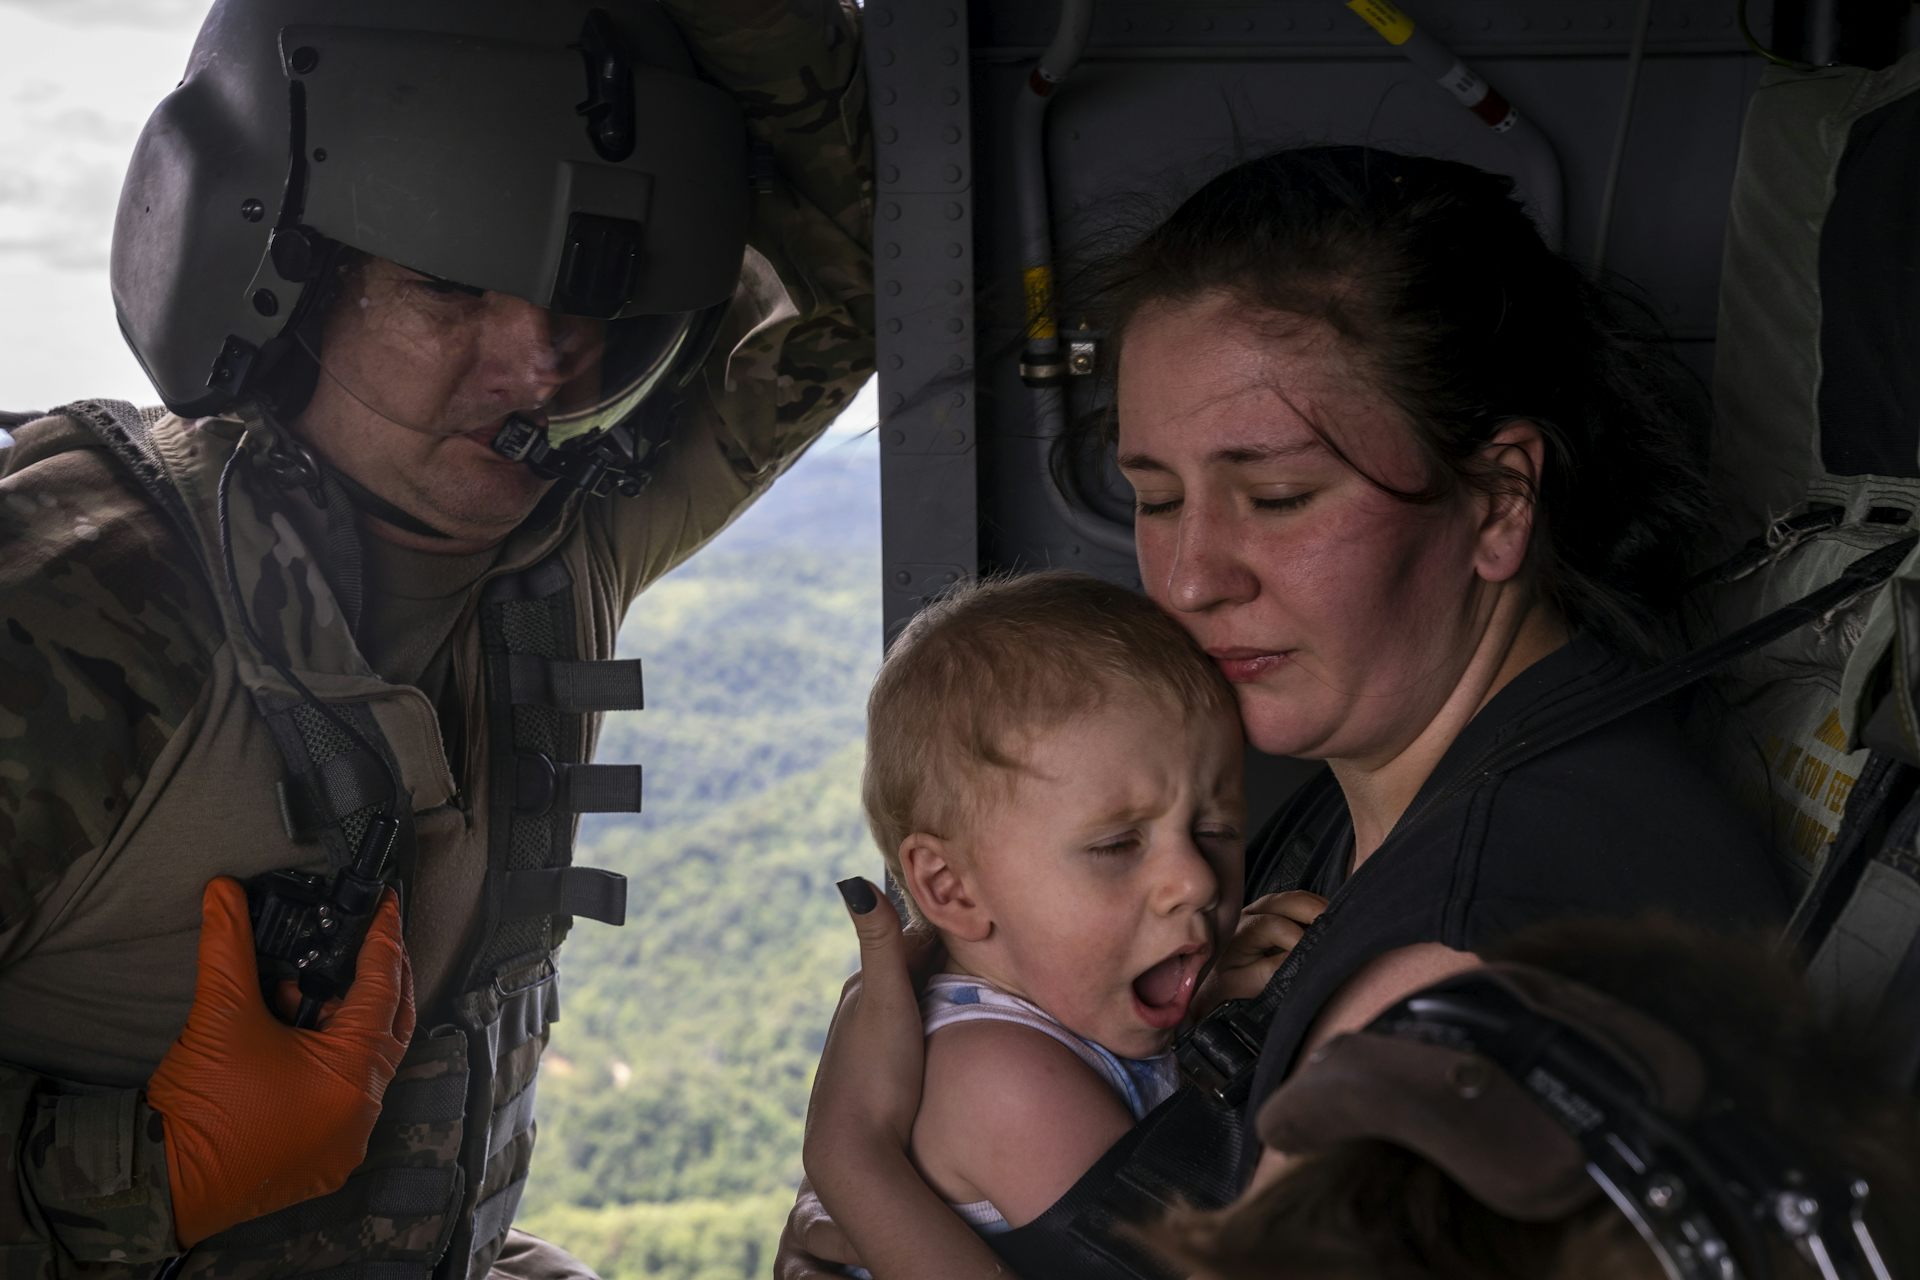 A woman with her eyes closed holds a screaming 1-year-old boy in a National Guard helicopter, with a guard member standing in the open helicopter door.